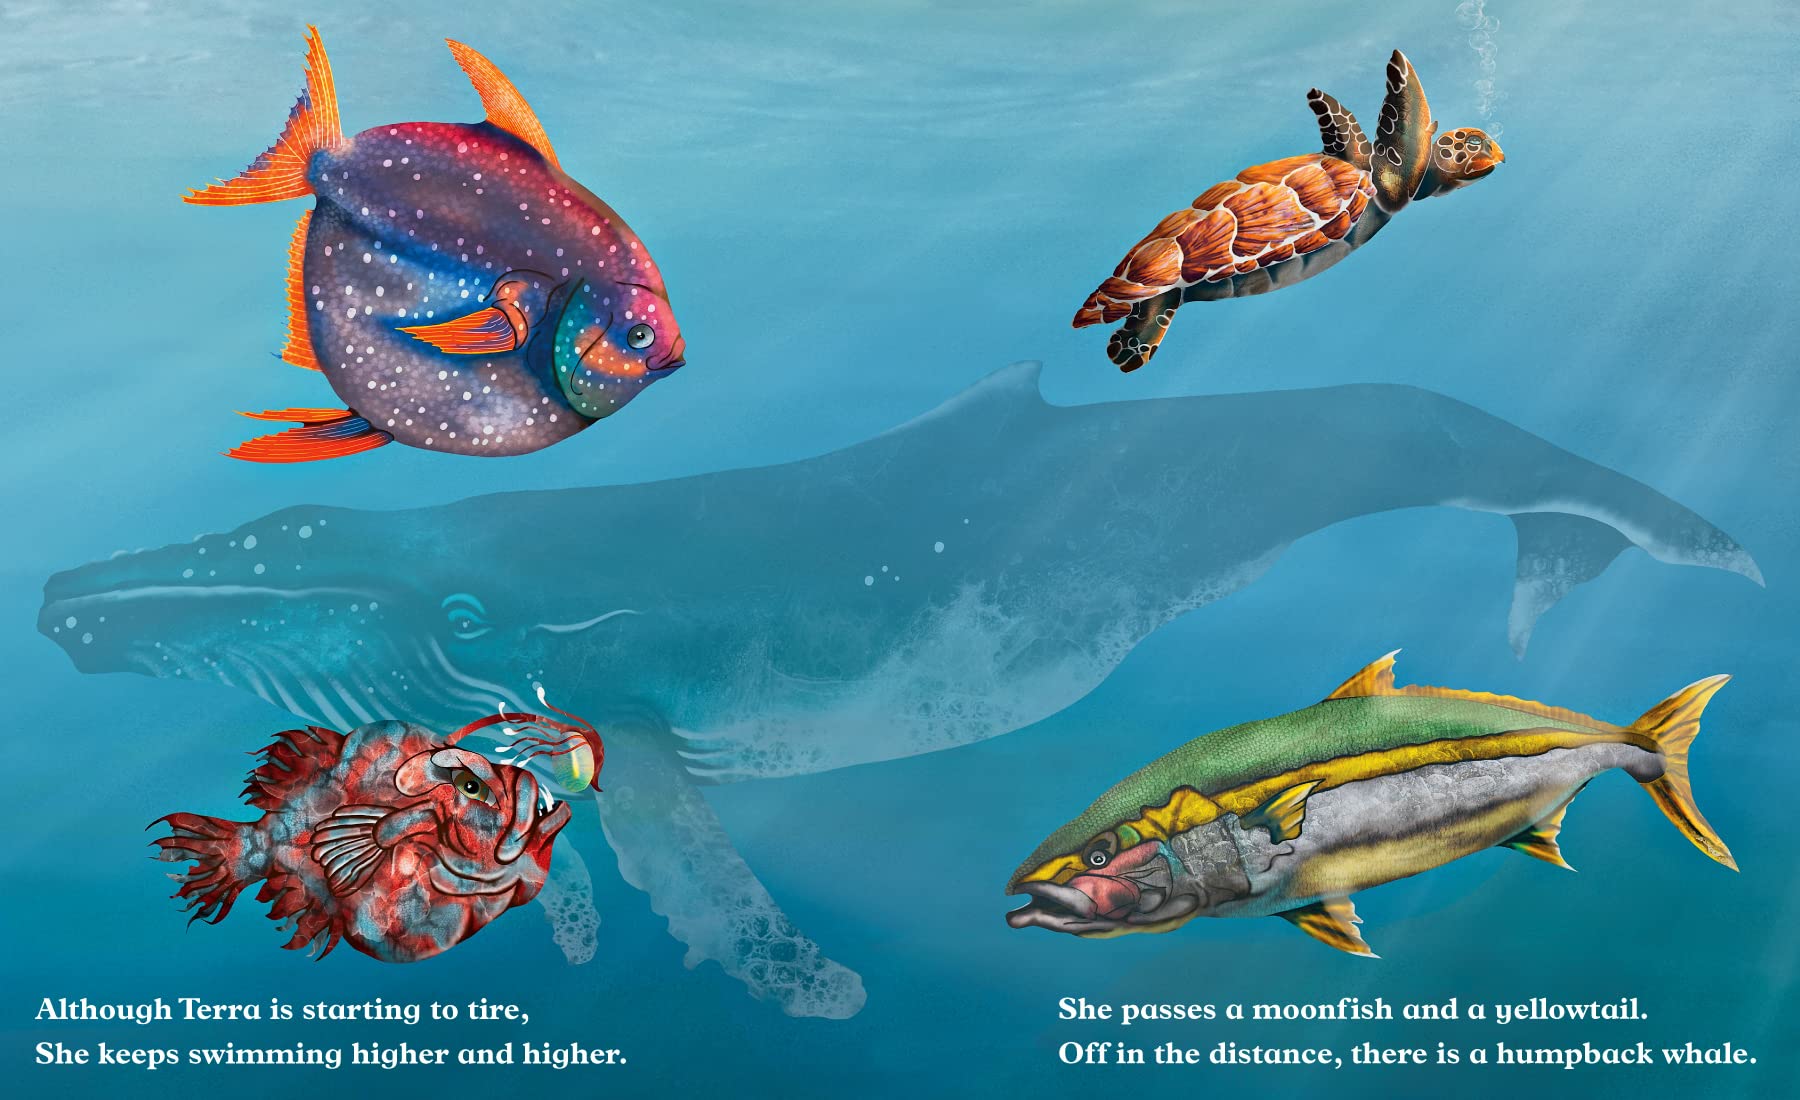 Dreaming of the Ocean (An educational children's picture book about sea creatures, including turtles, fish, giant squid, anglerfish, and whales - a great bedtime / good night story for kids)